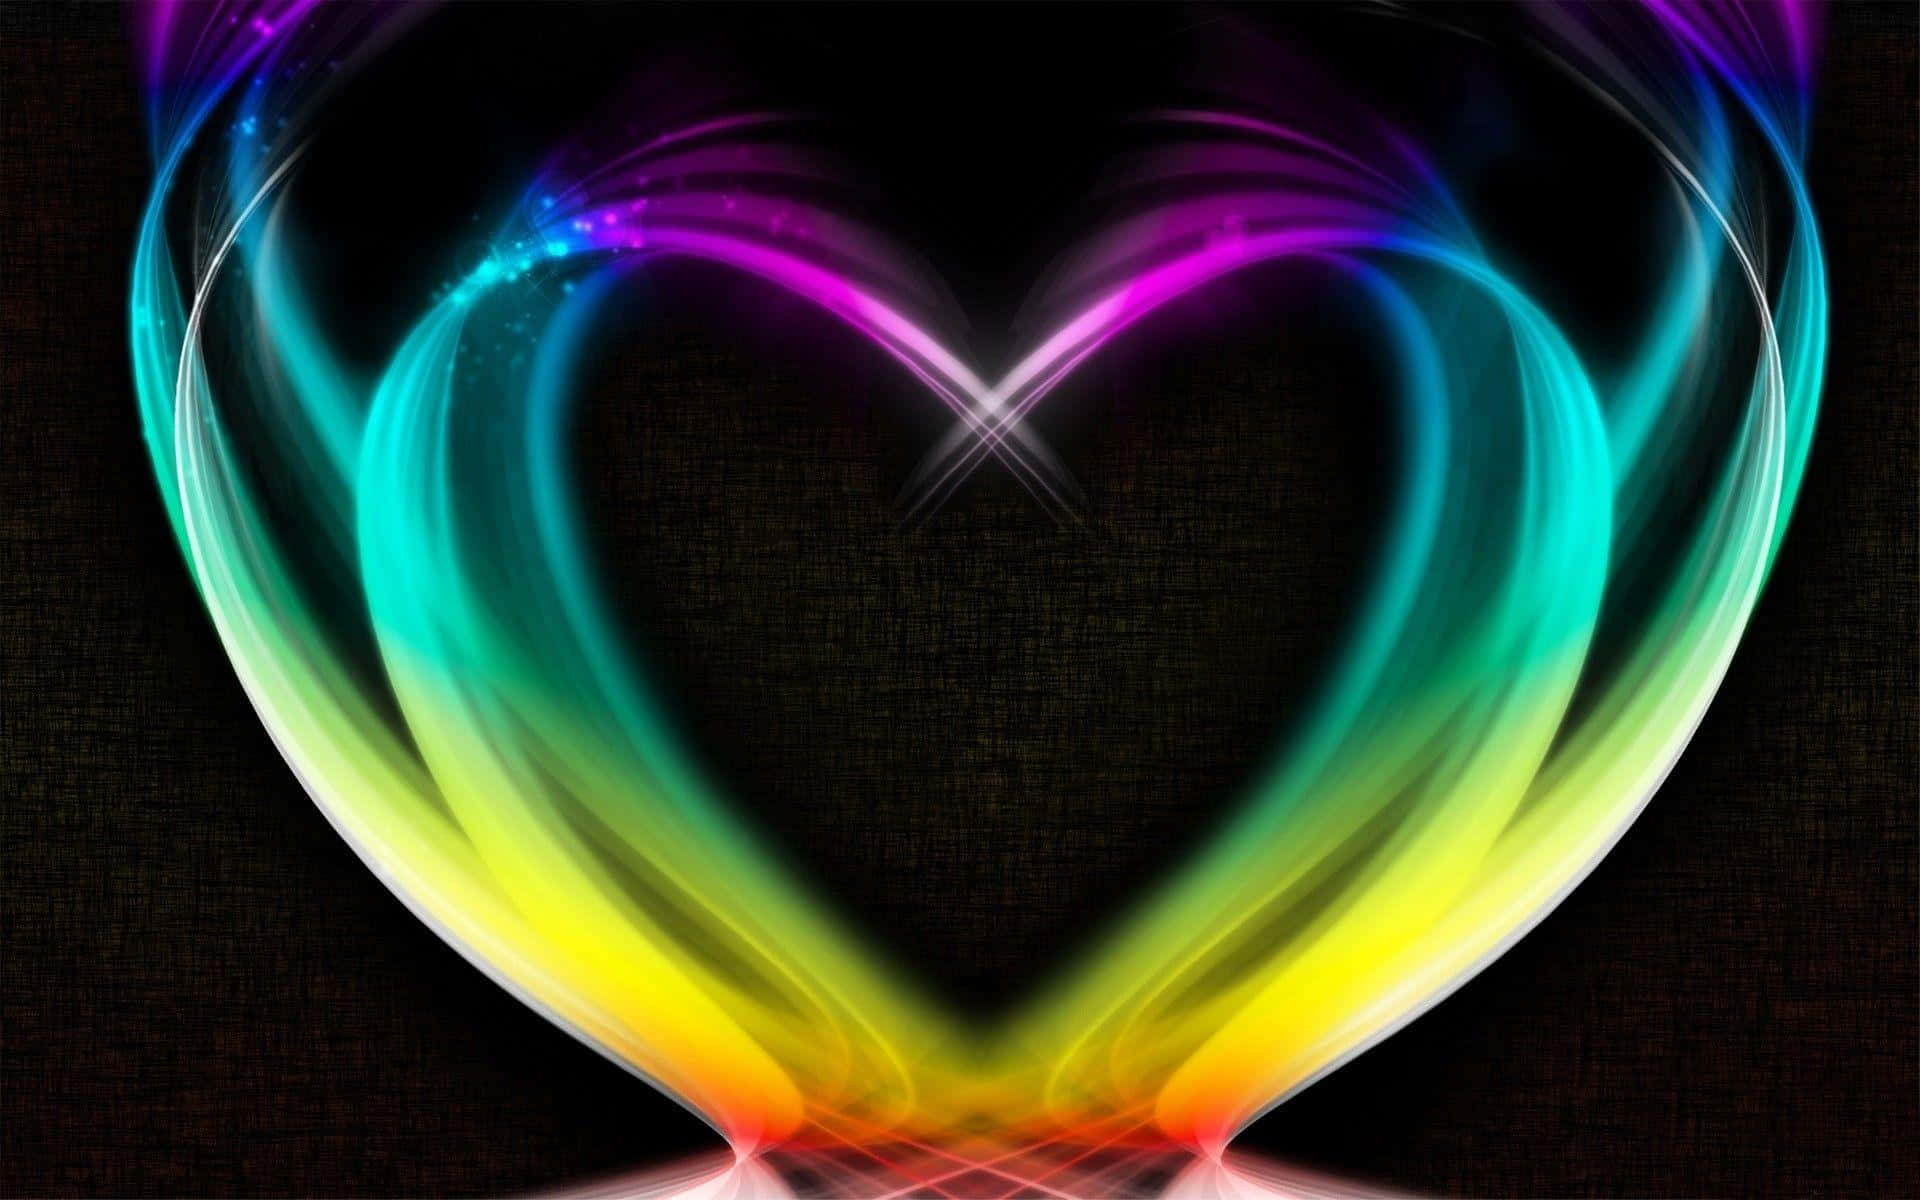 Let Your Heart Shine With A Burst Of Vibrant Love! Wallpaper